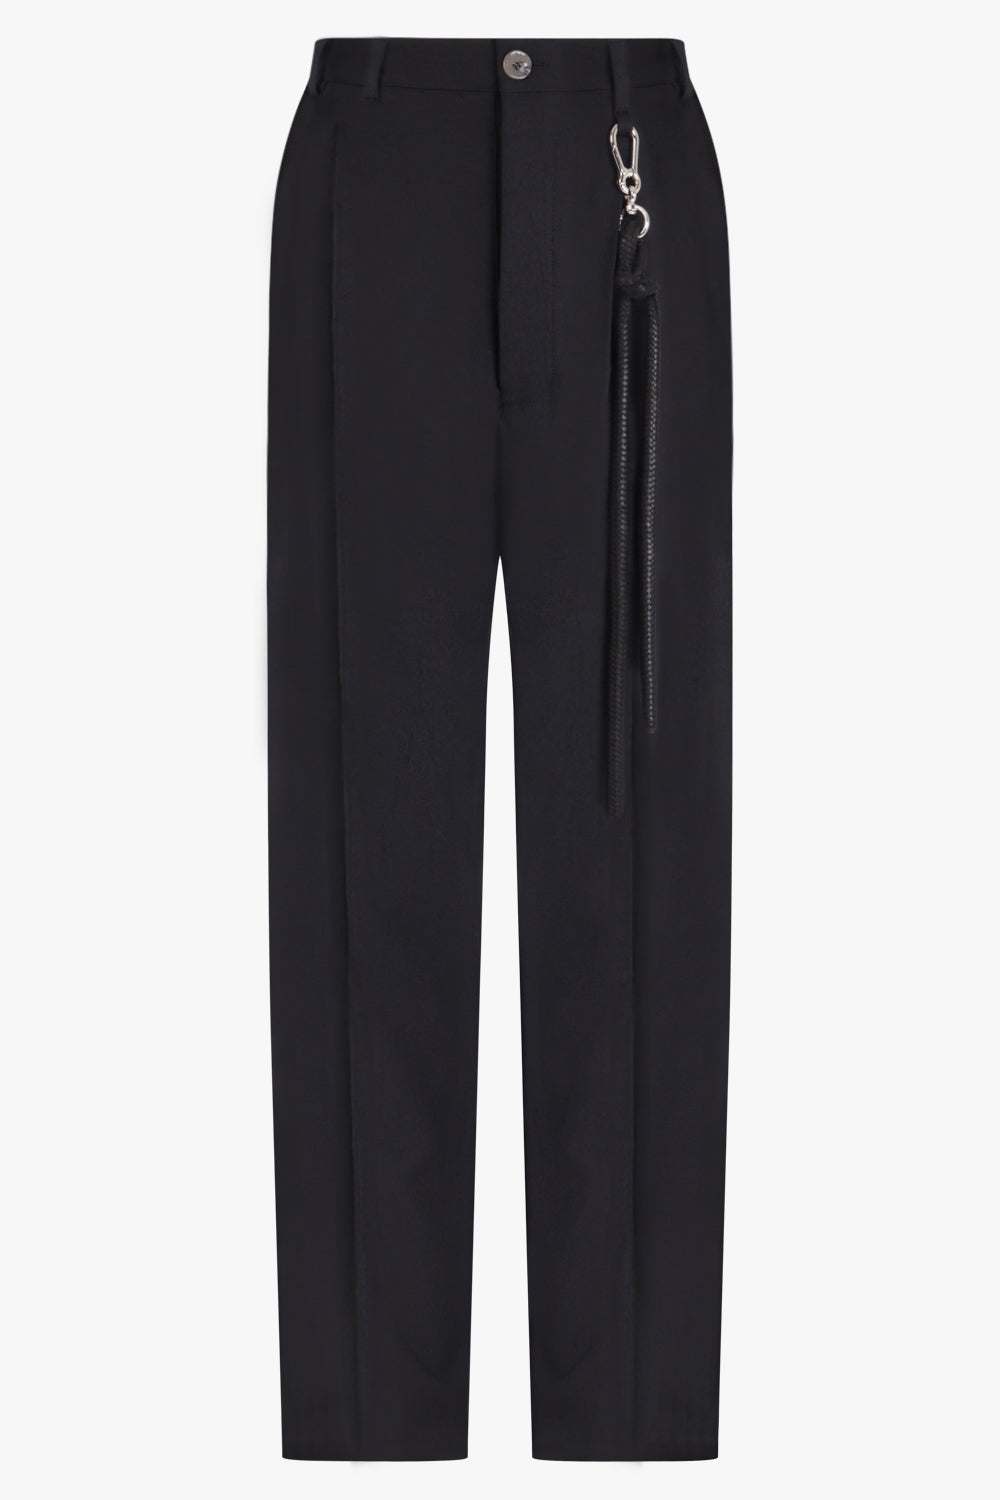 SONG FOR THE MUTE PANTS Loose Pleated Pant | Black